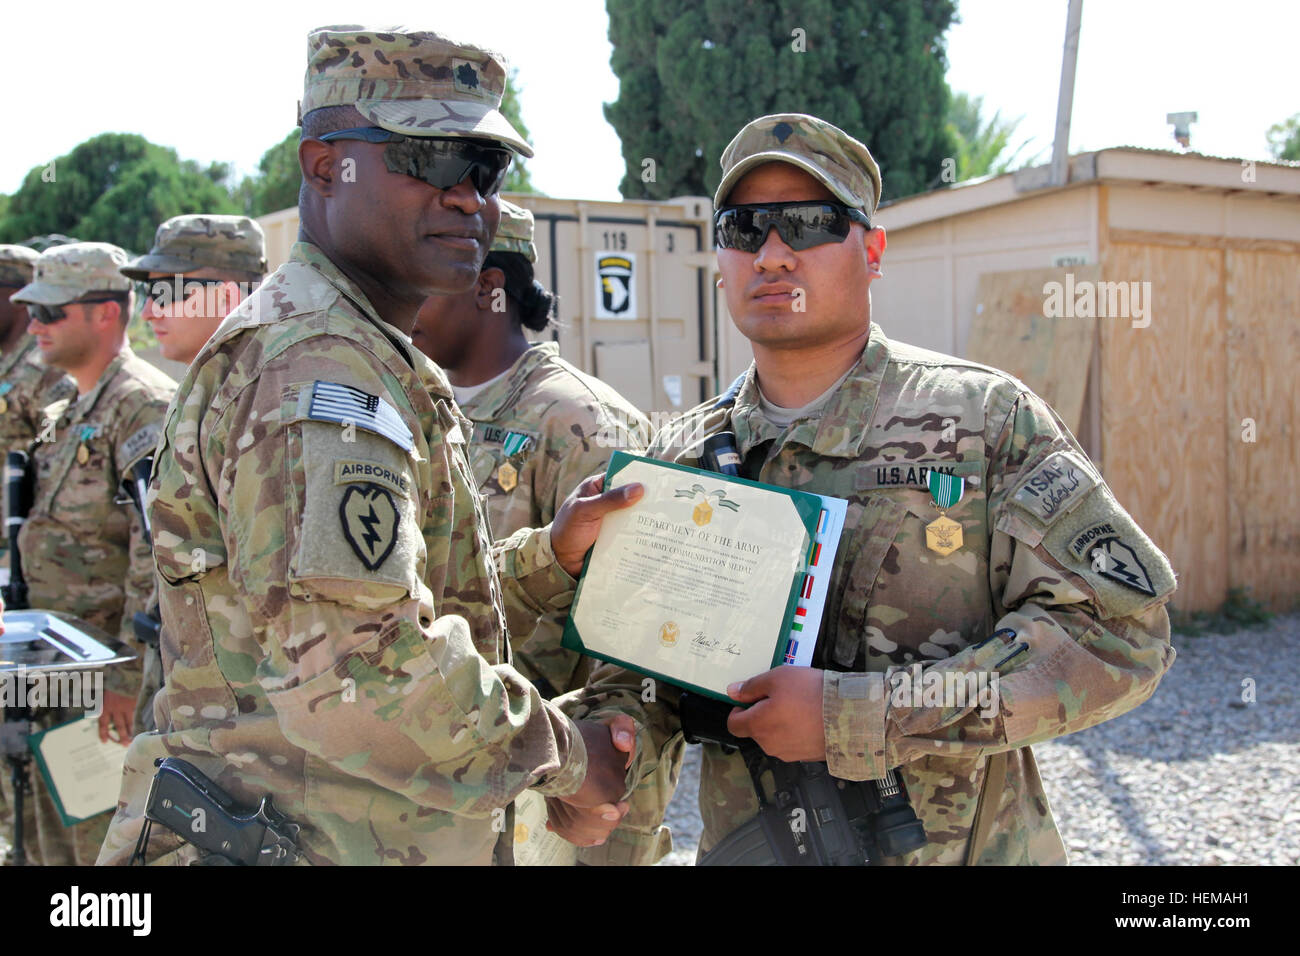 U.S. Army Spc. Yiftheg with 425th Brigade Special Troops Battalion (Airborne), Task Force 4-25, is awarded the Army Commendation Medal by U.S. Army Lt. Col. Frank Smith, battalion commander for 425th Brigade Special Troops Battalion (Airborne), on Forward Operating Base Salerno, Khost province, Afghanistan, Sept. 29, 2012. Award ceremony 120929-A-PO167-108 Stock Photo